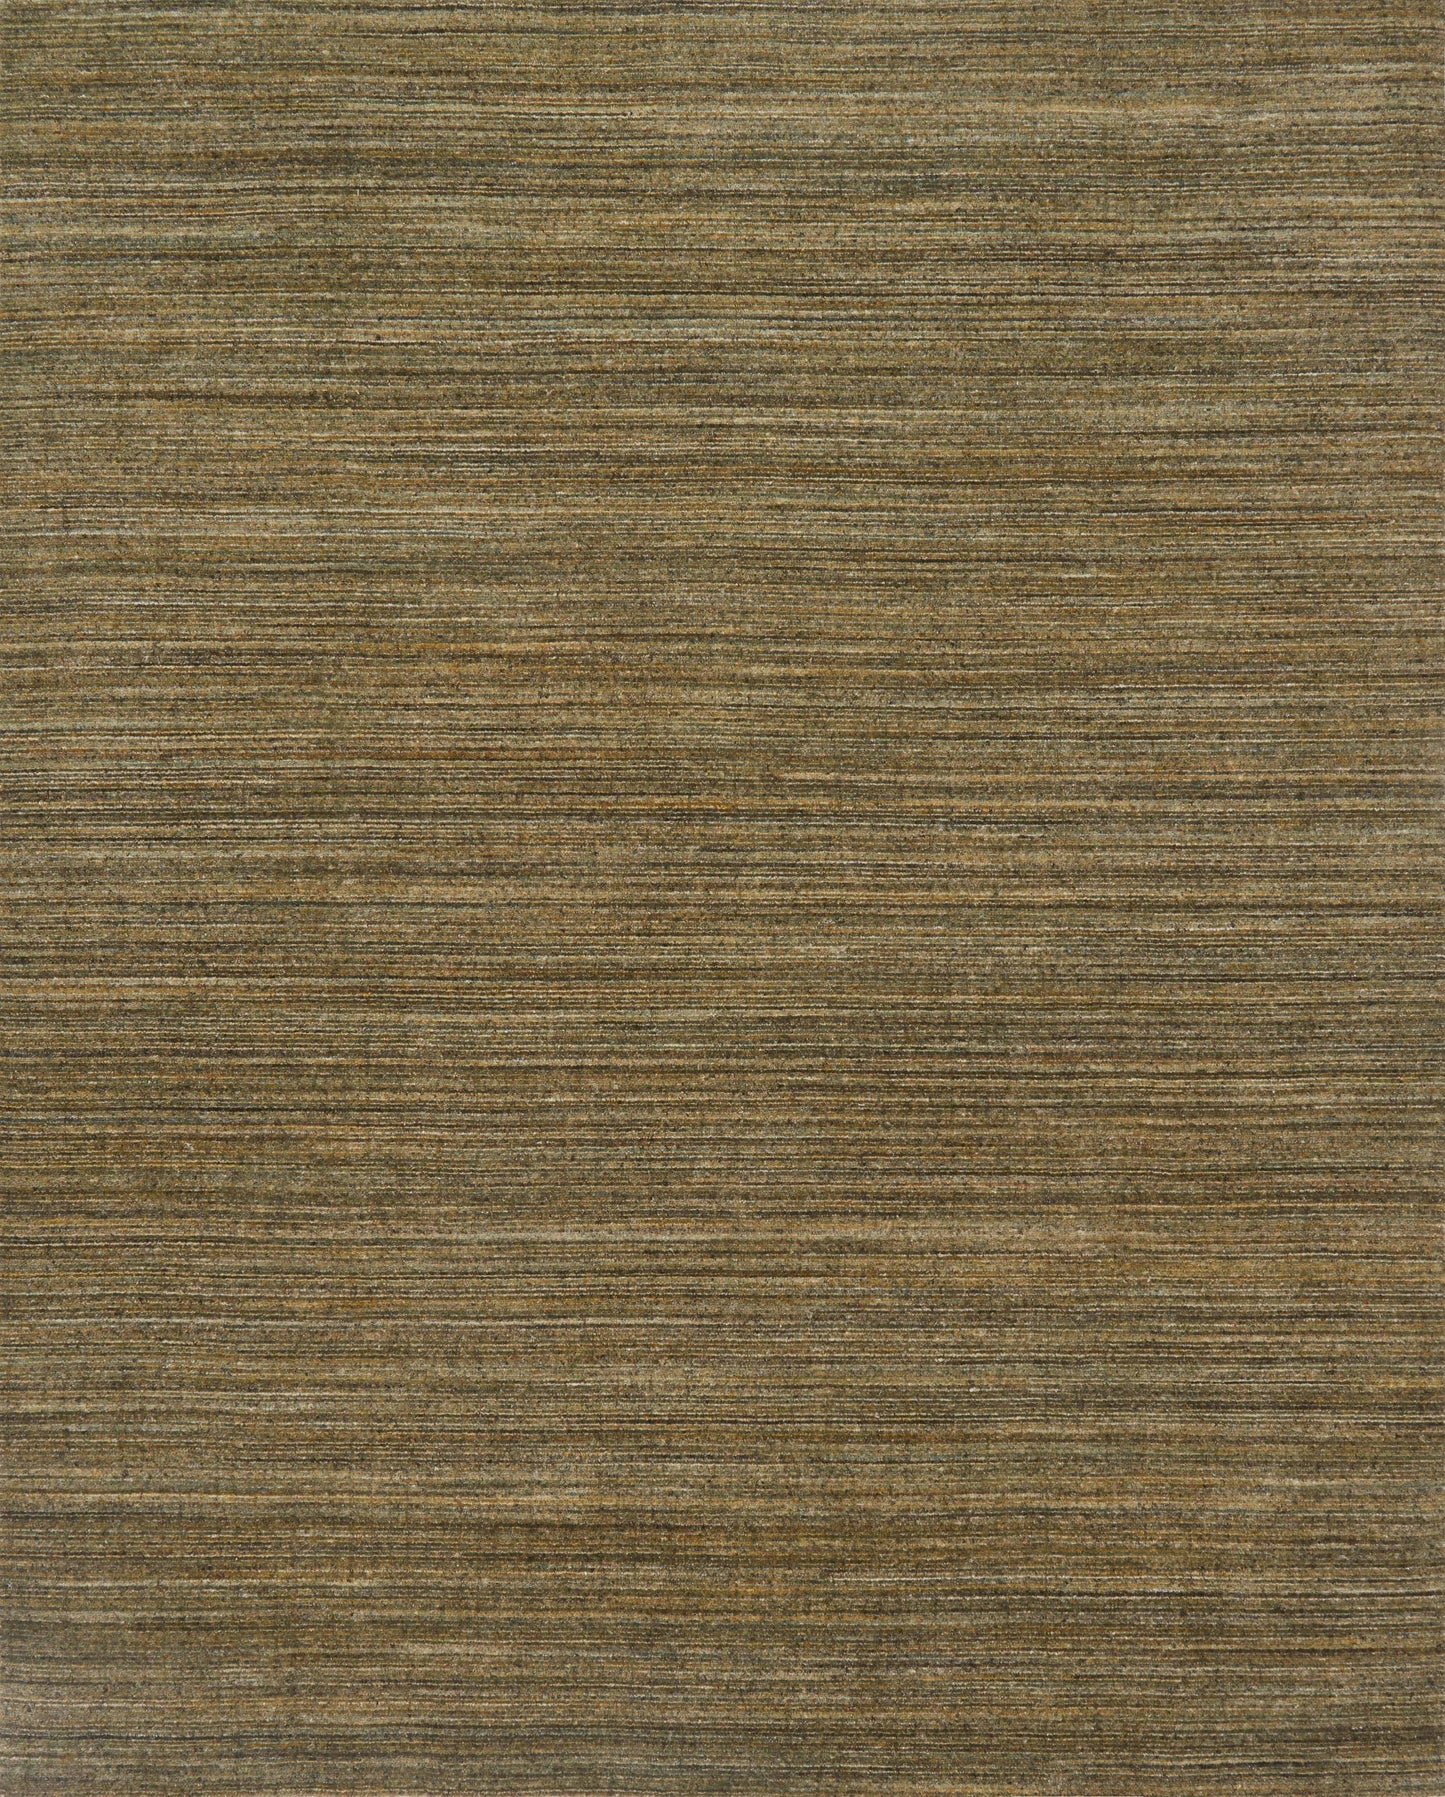 A picture of Loloi's Vaughn rug, in style VG-01, color Olive